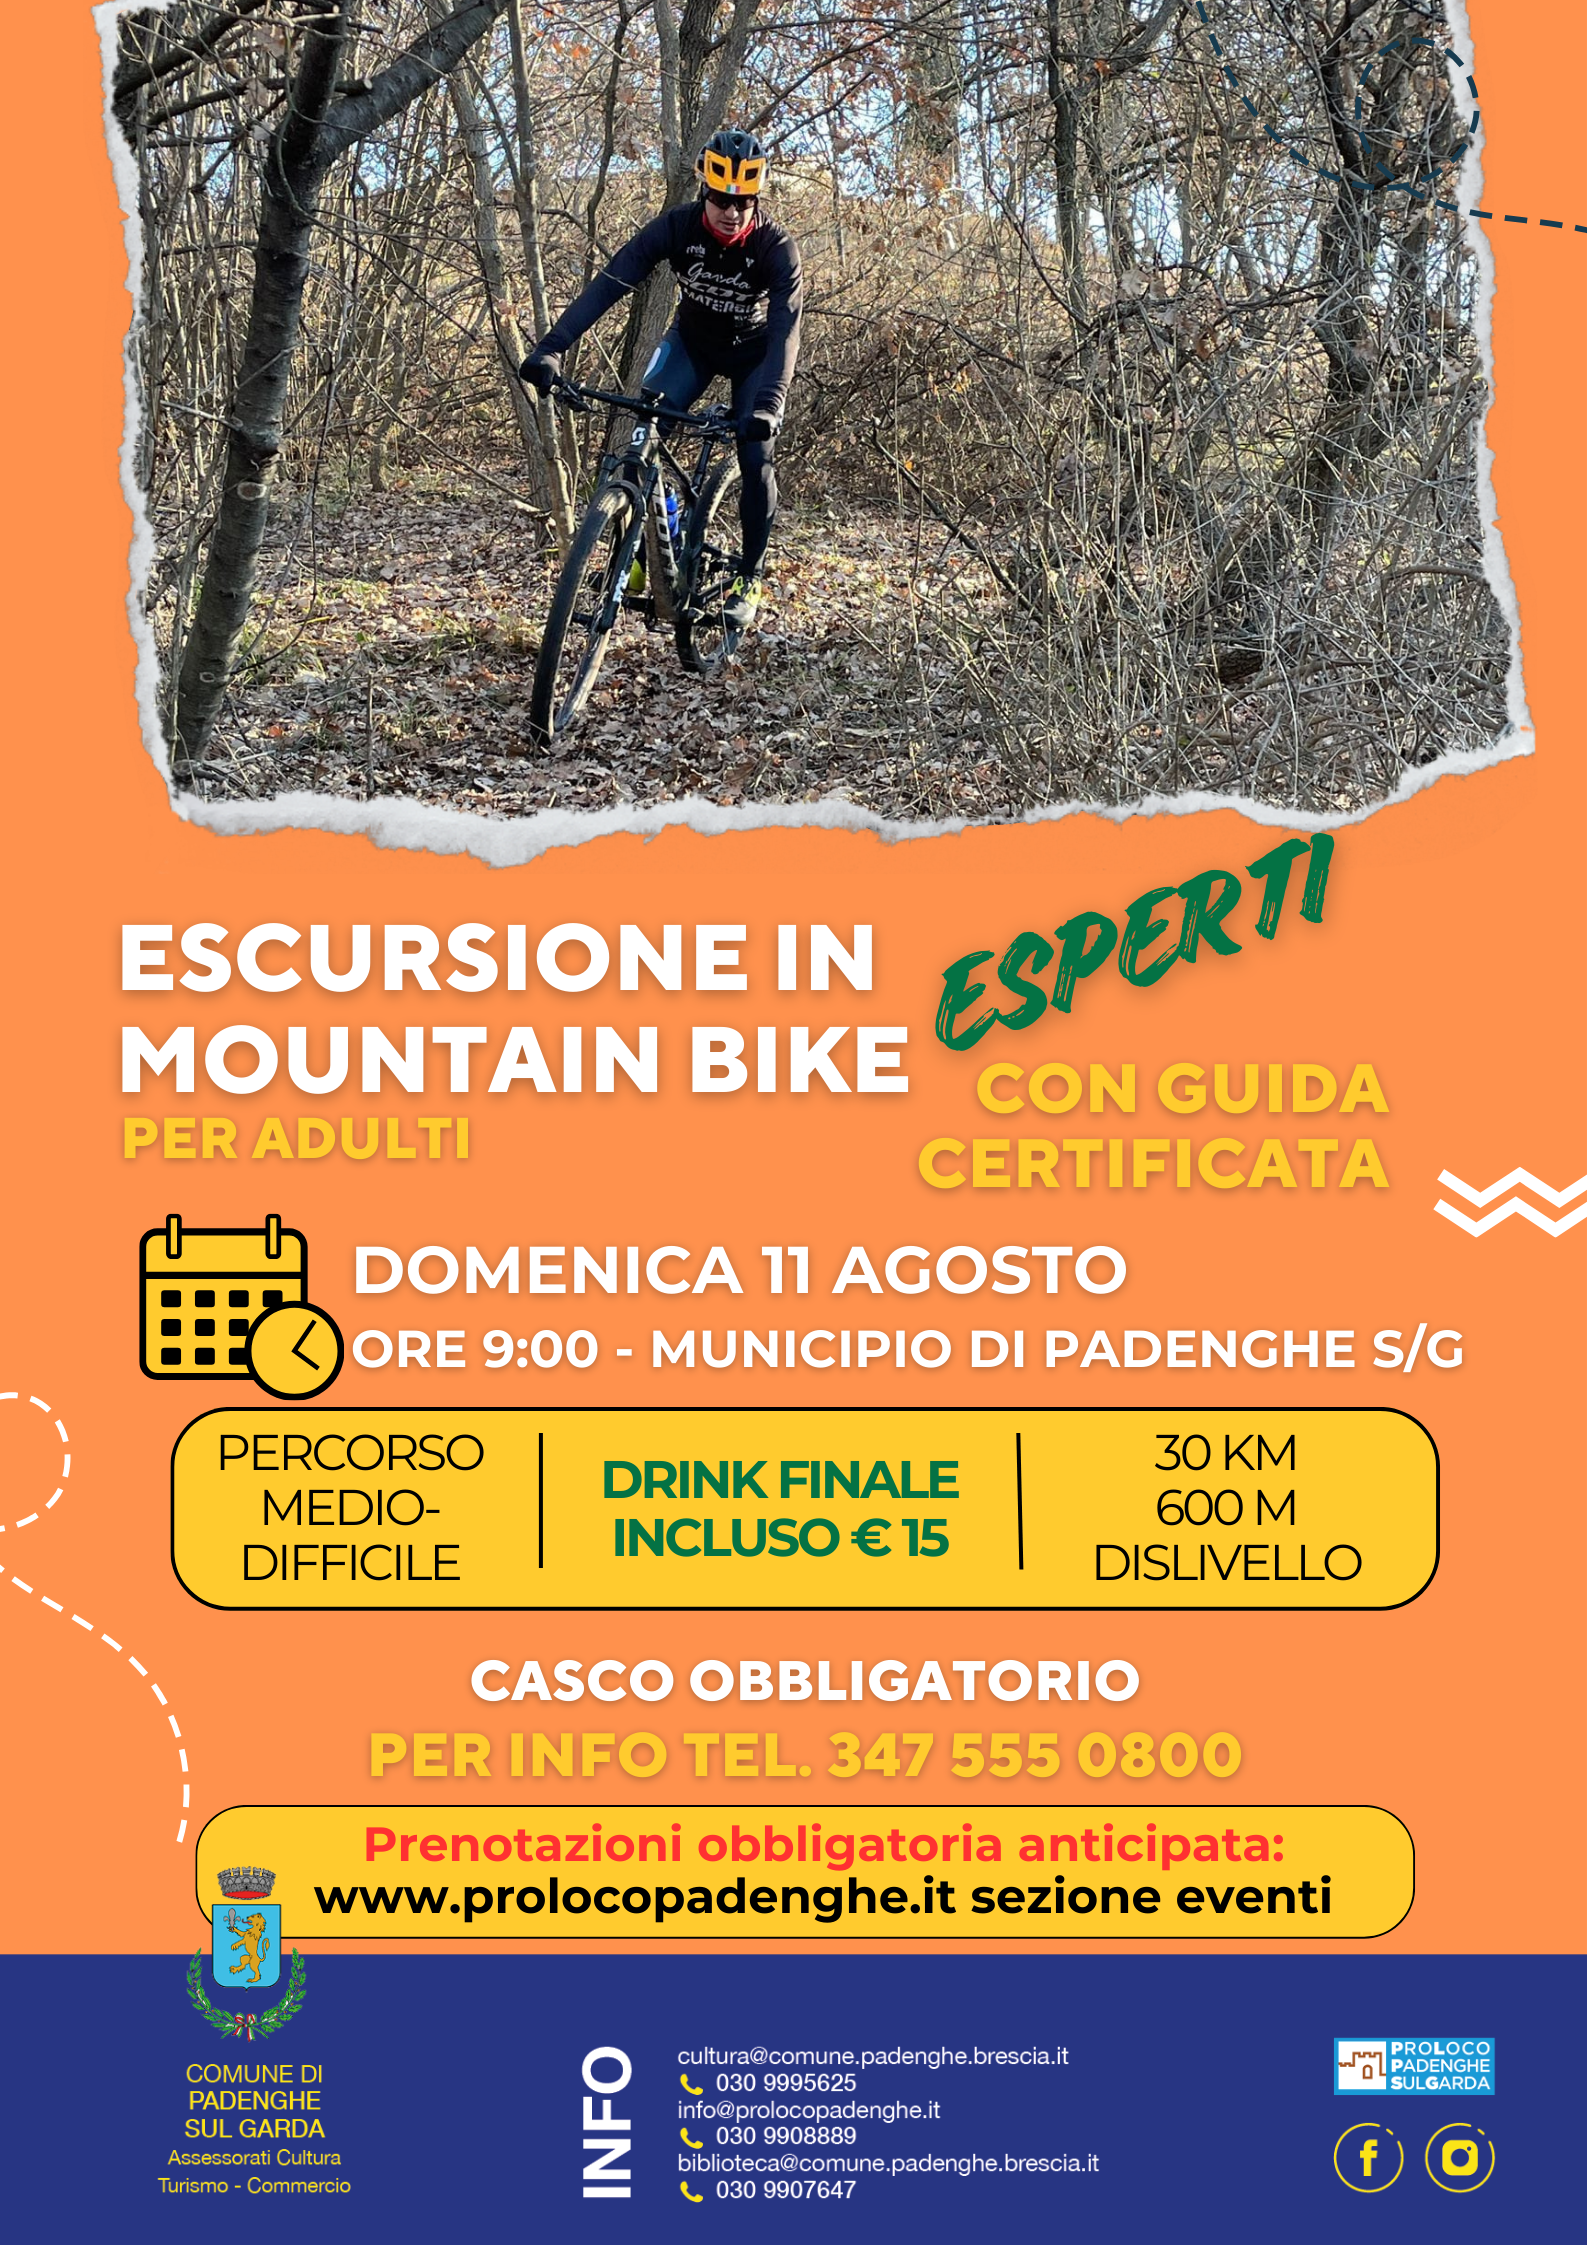 MOUNTAIN BIKE EXCURSION FOR EXPERTS 11th AUGUST